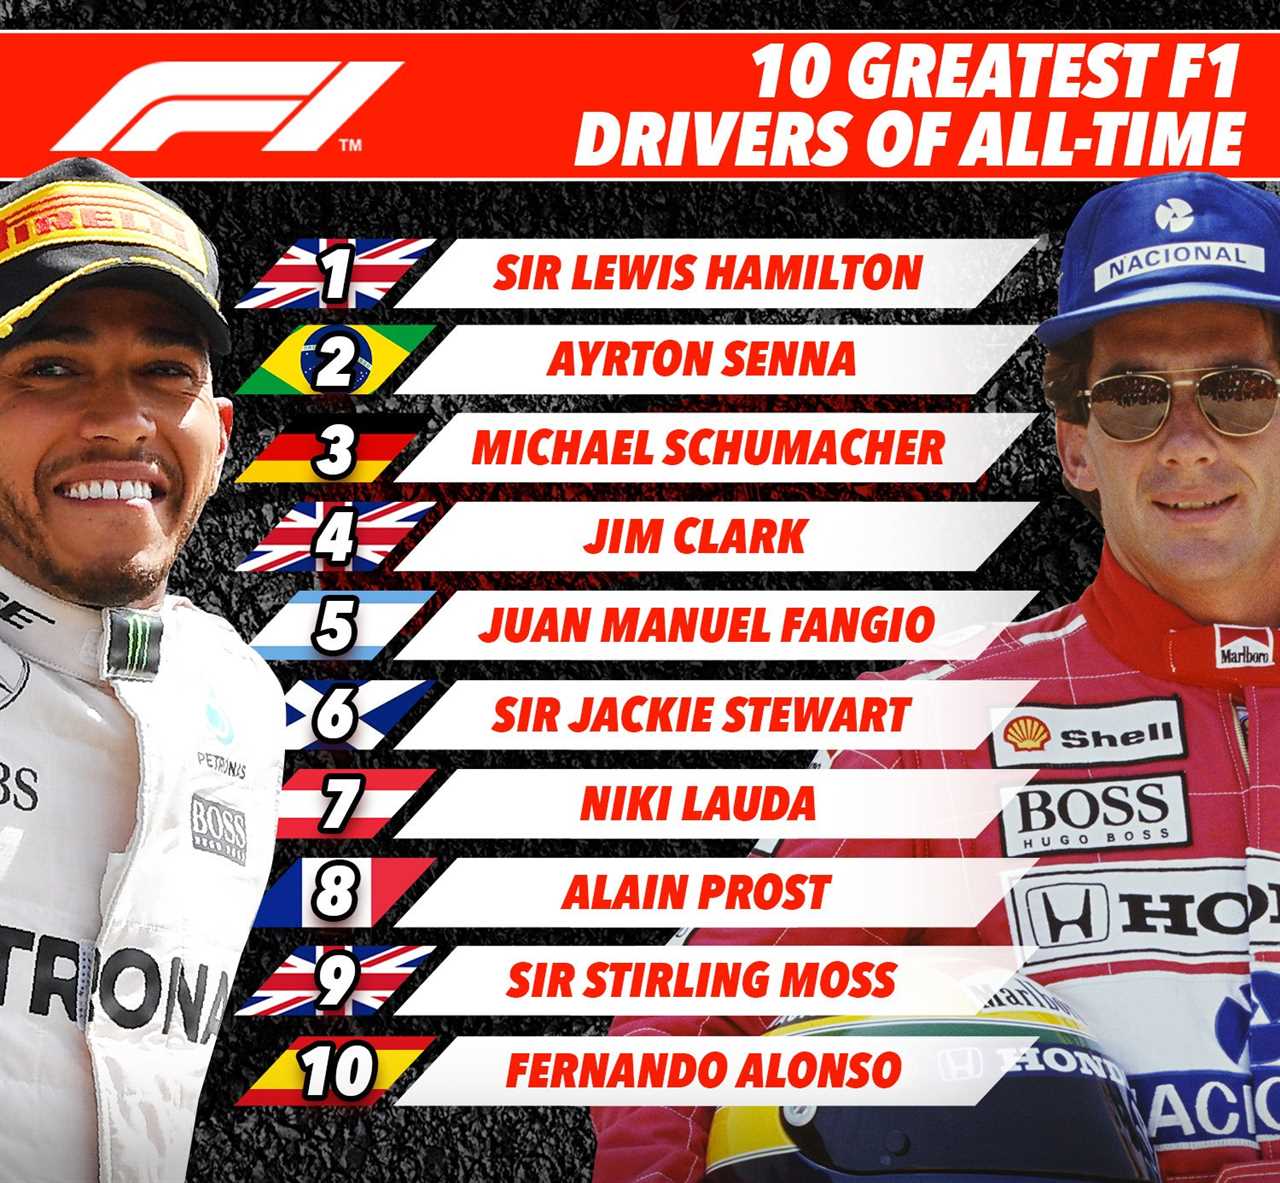 The ten greatest F1 drivers of all time - according to SunSports motorsport correspondent Ben Hunt